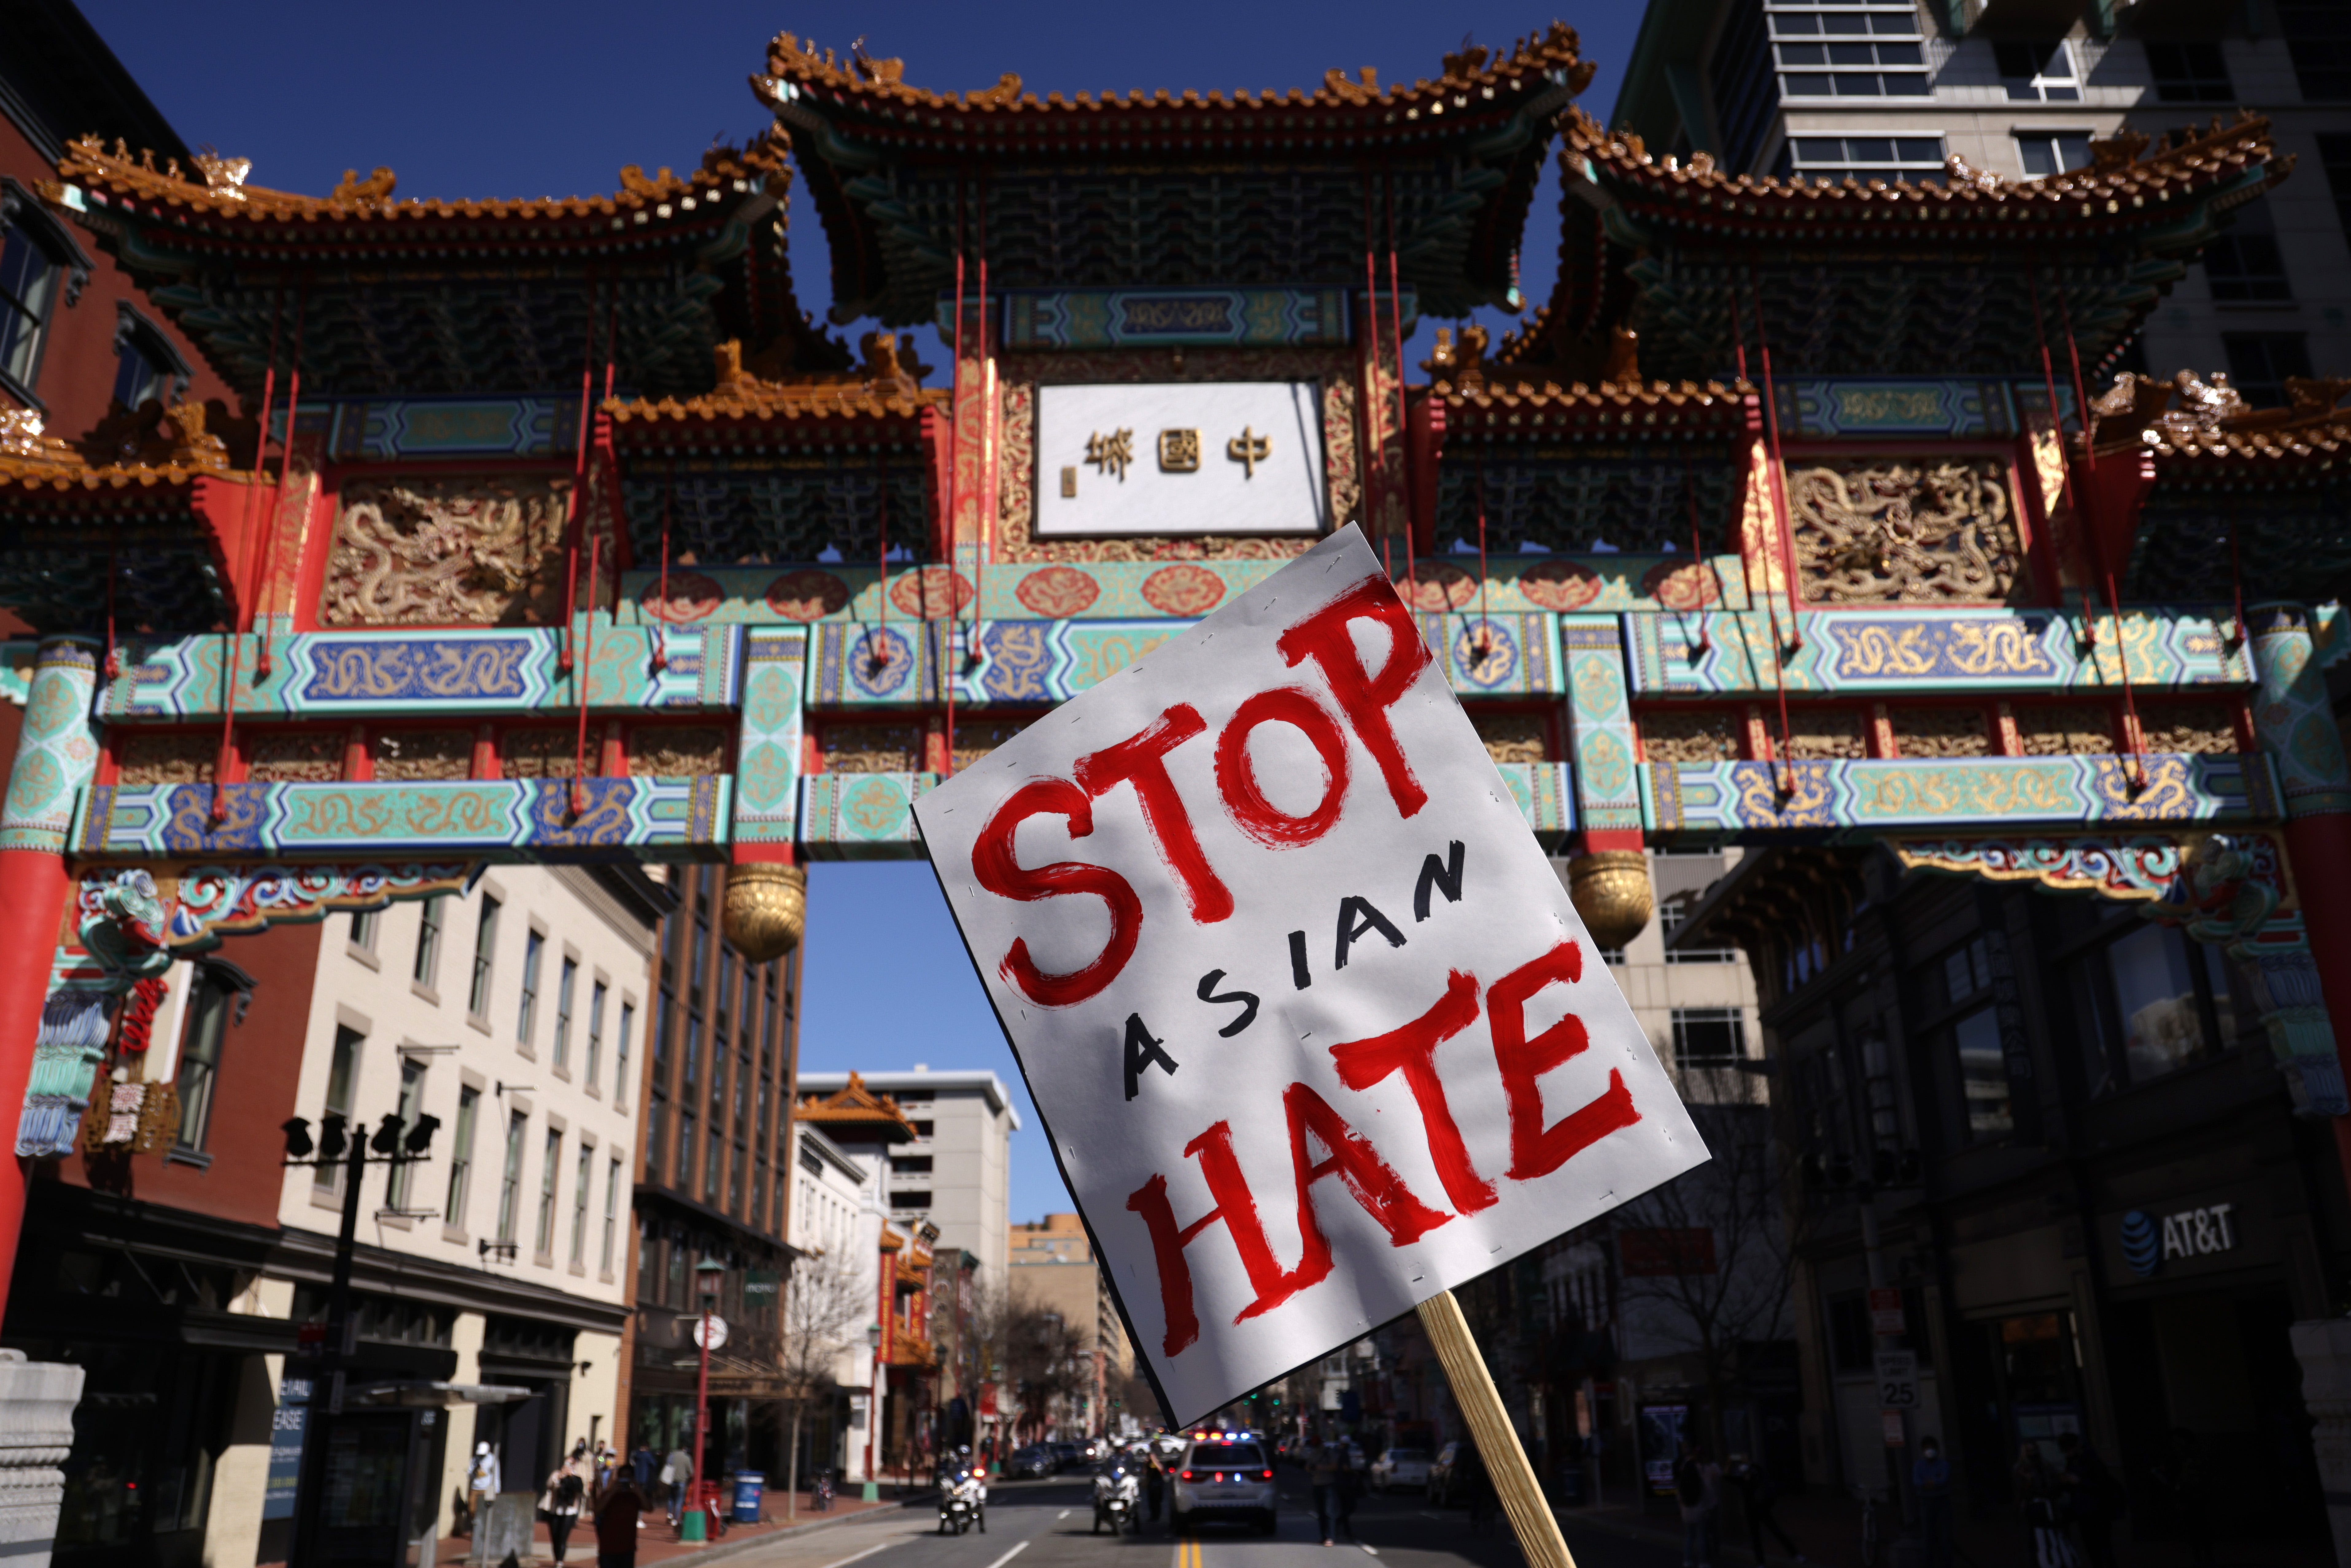 As mental health issues plague Asian American communities, some fight silence around issue